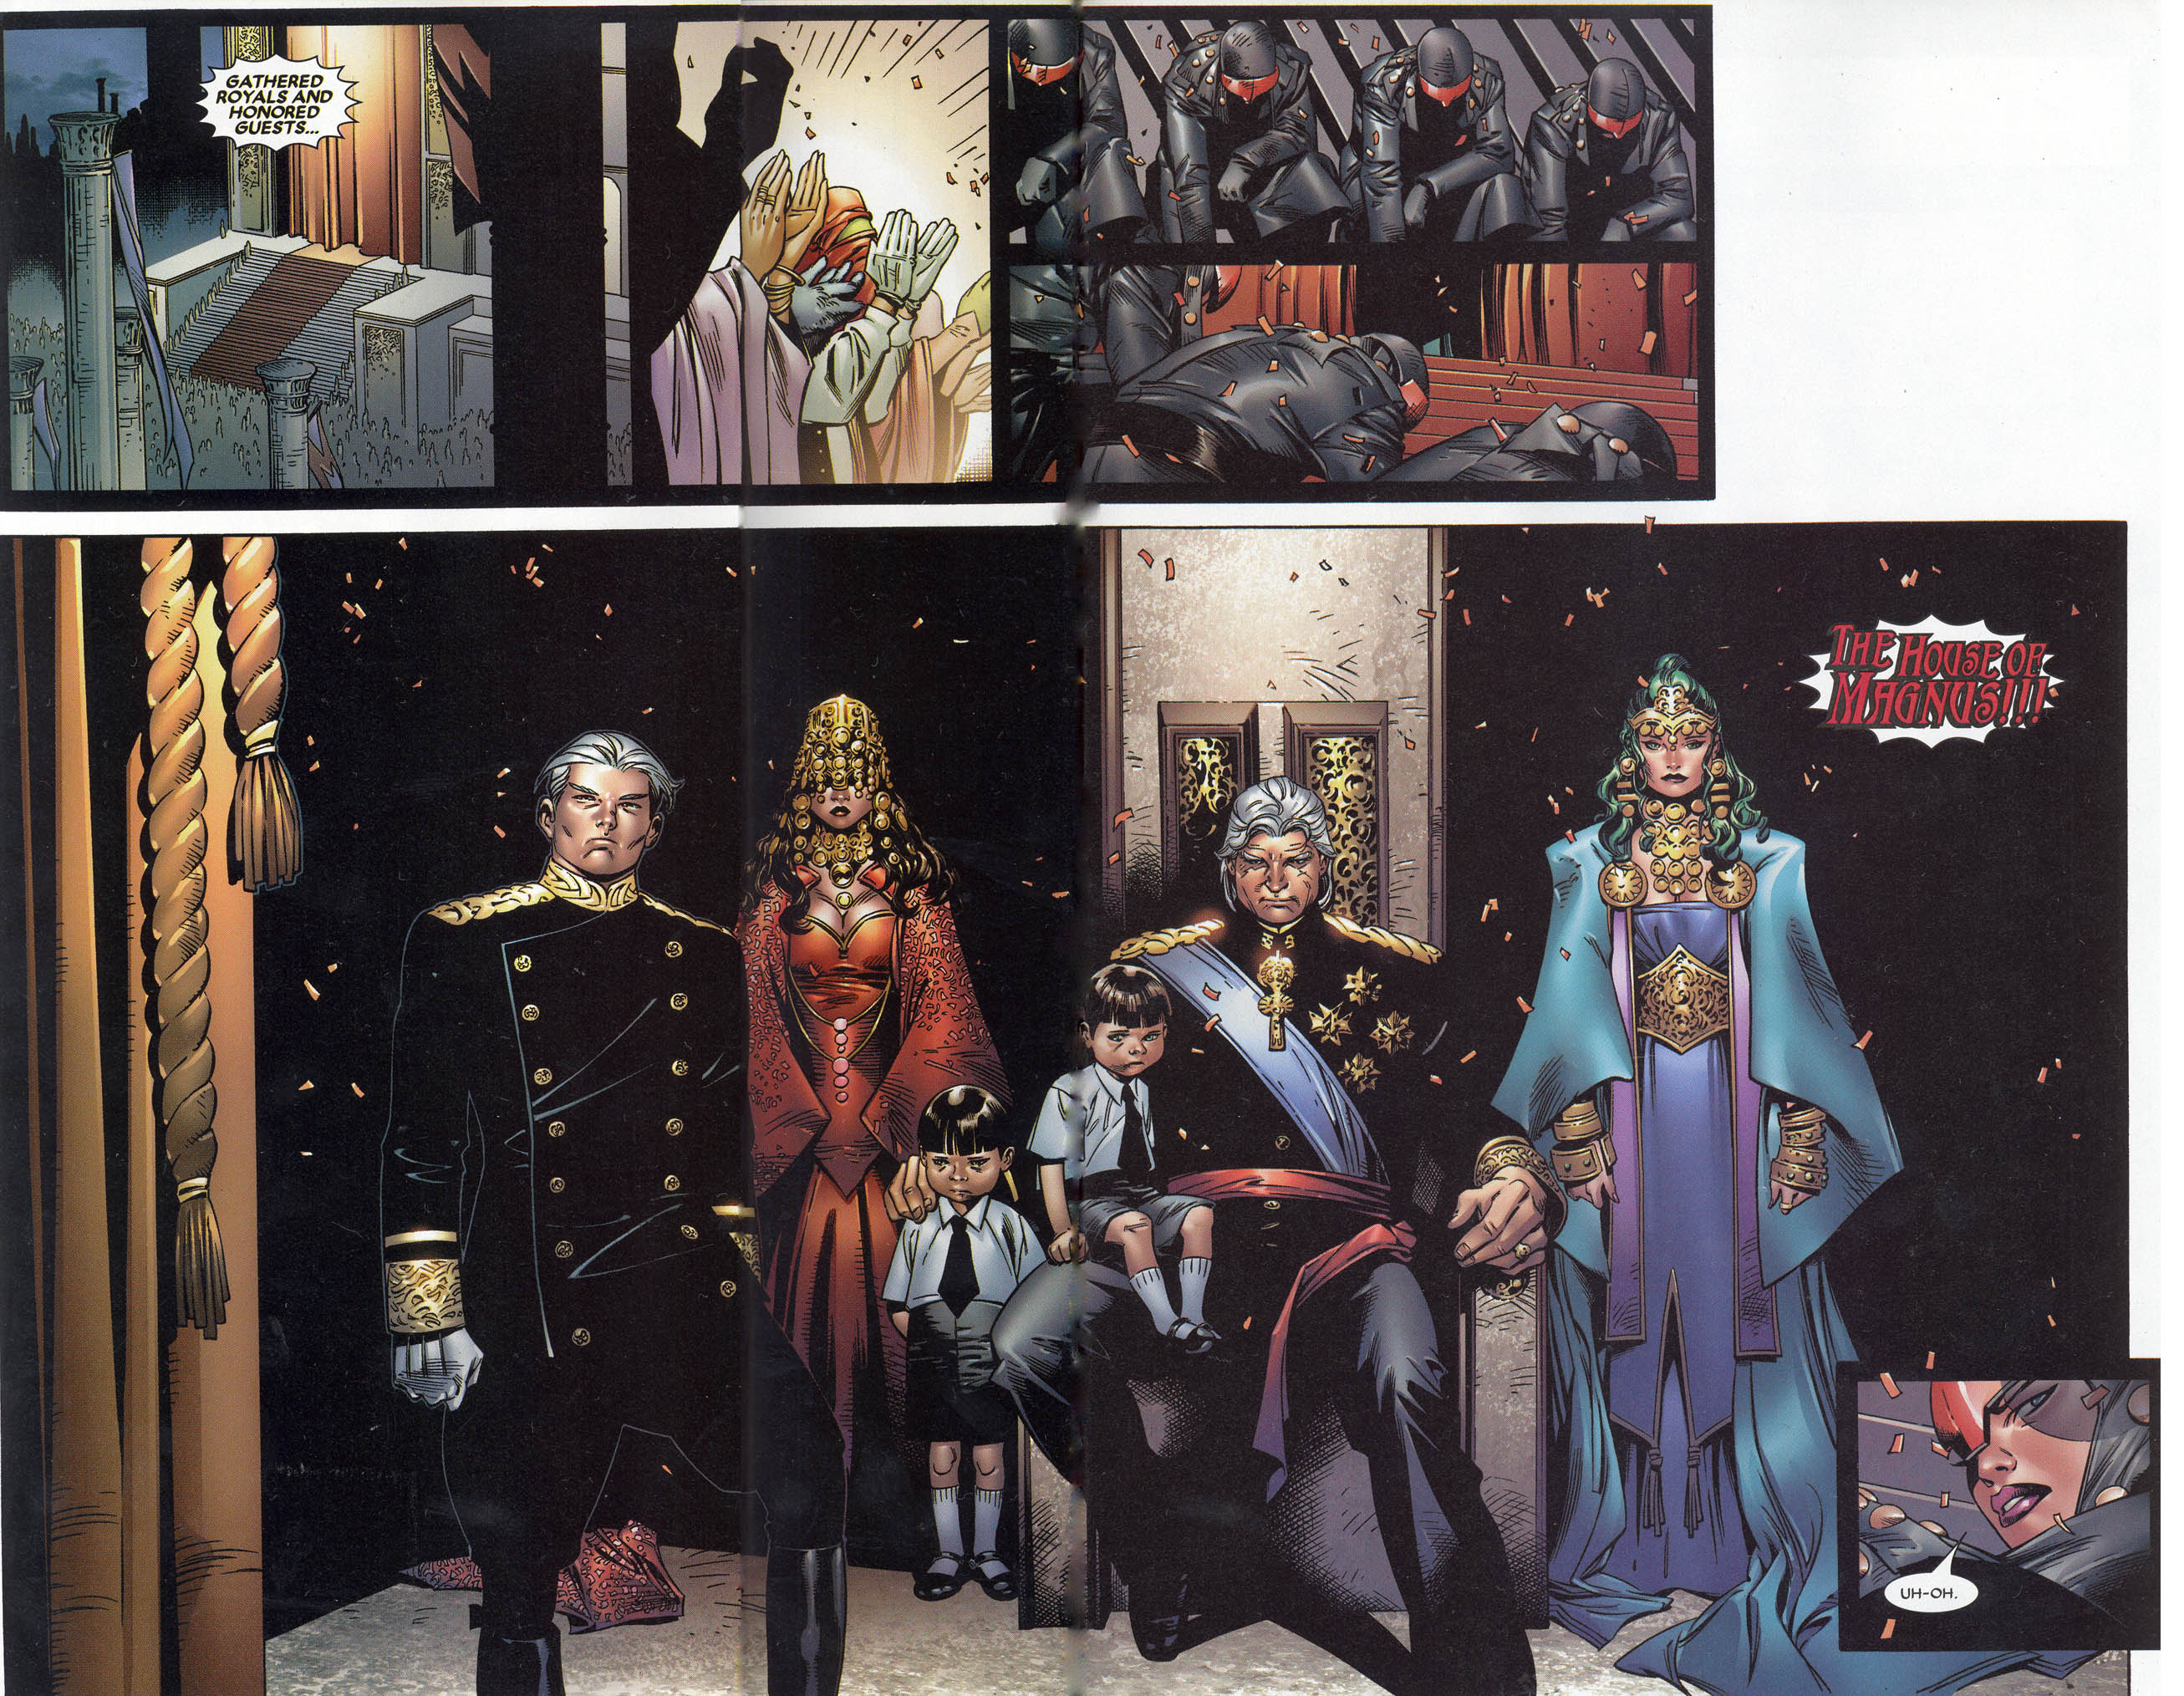 House of M 6 of 8